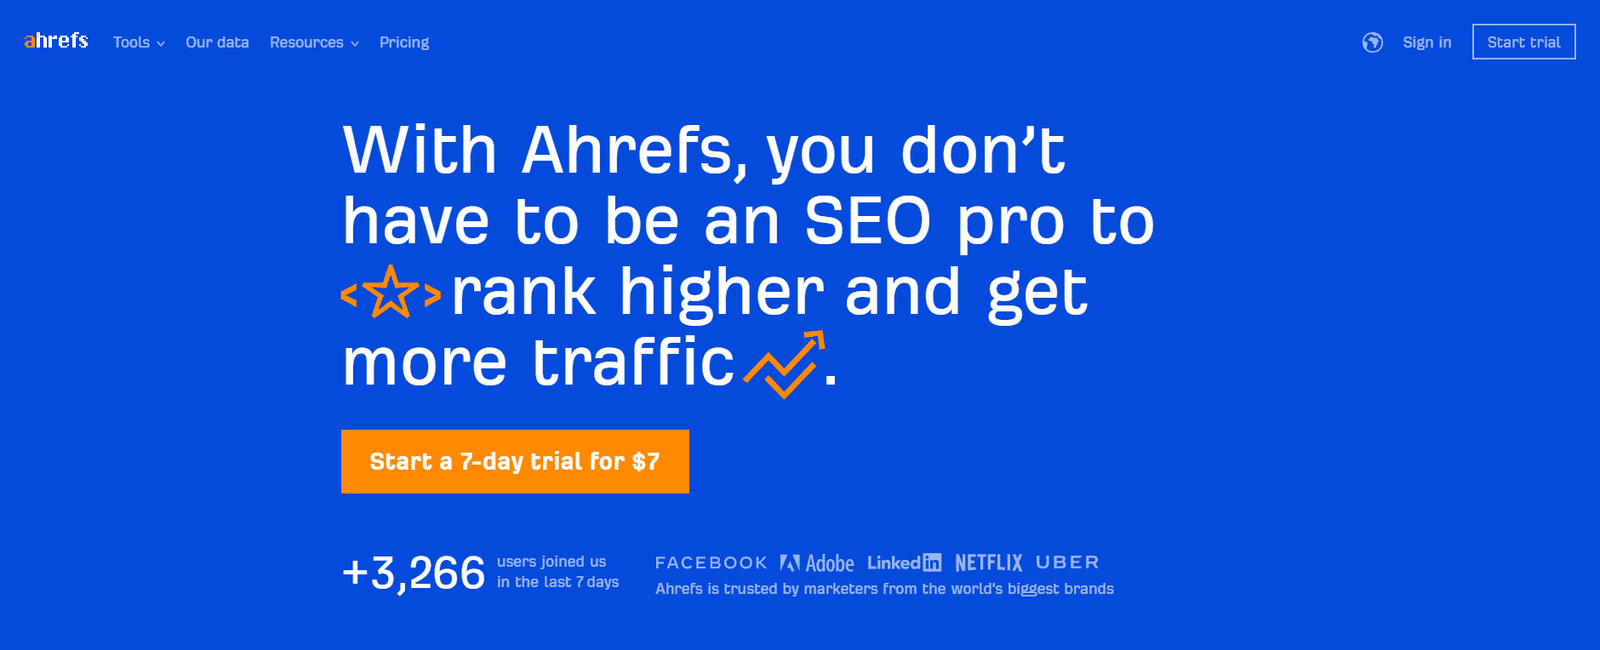 Ahrefs Trial for 7 days